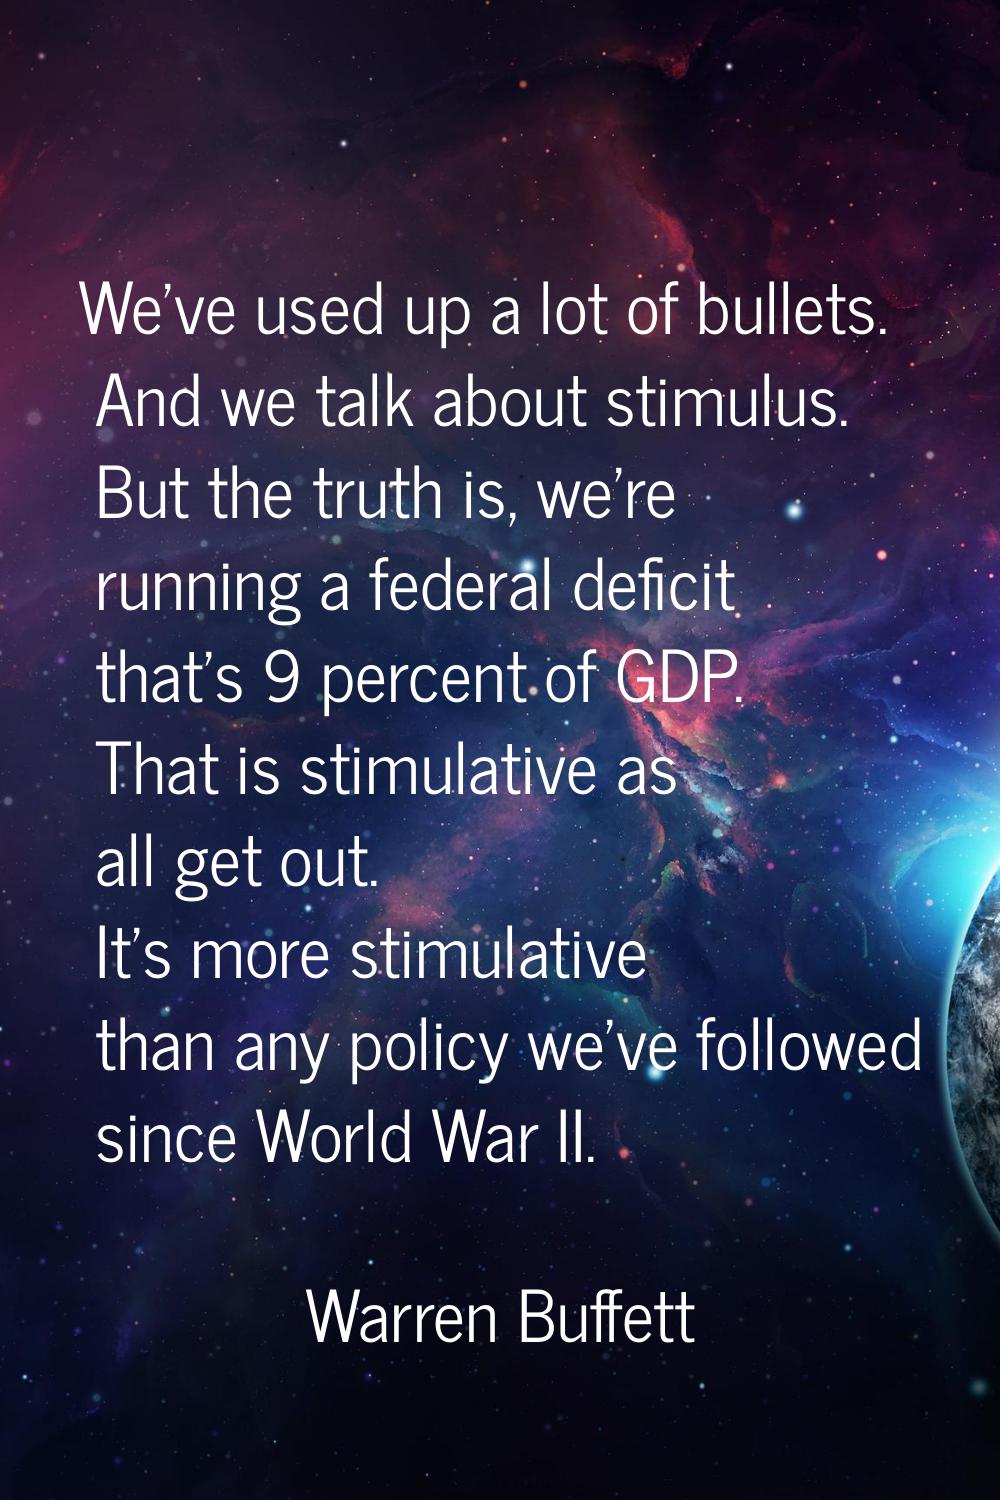 We've used up a lot of bullets. And we talk about stimulus. But the truth is, we're running a feder